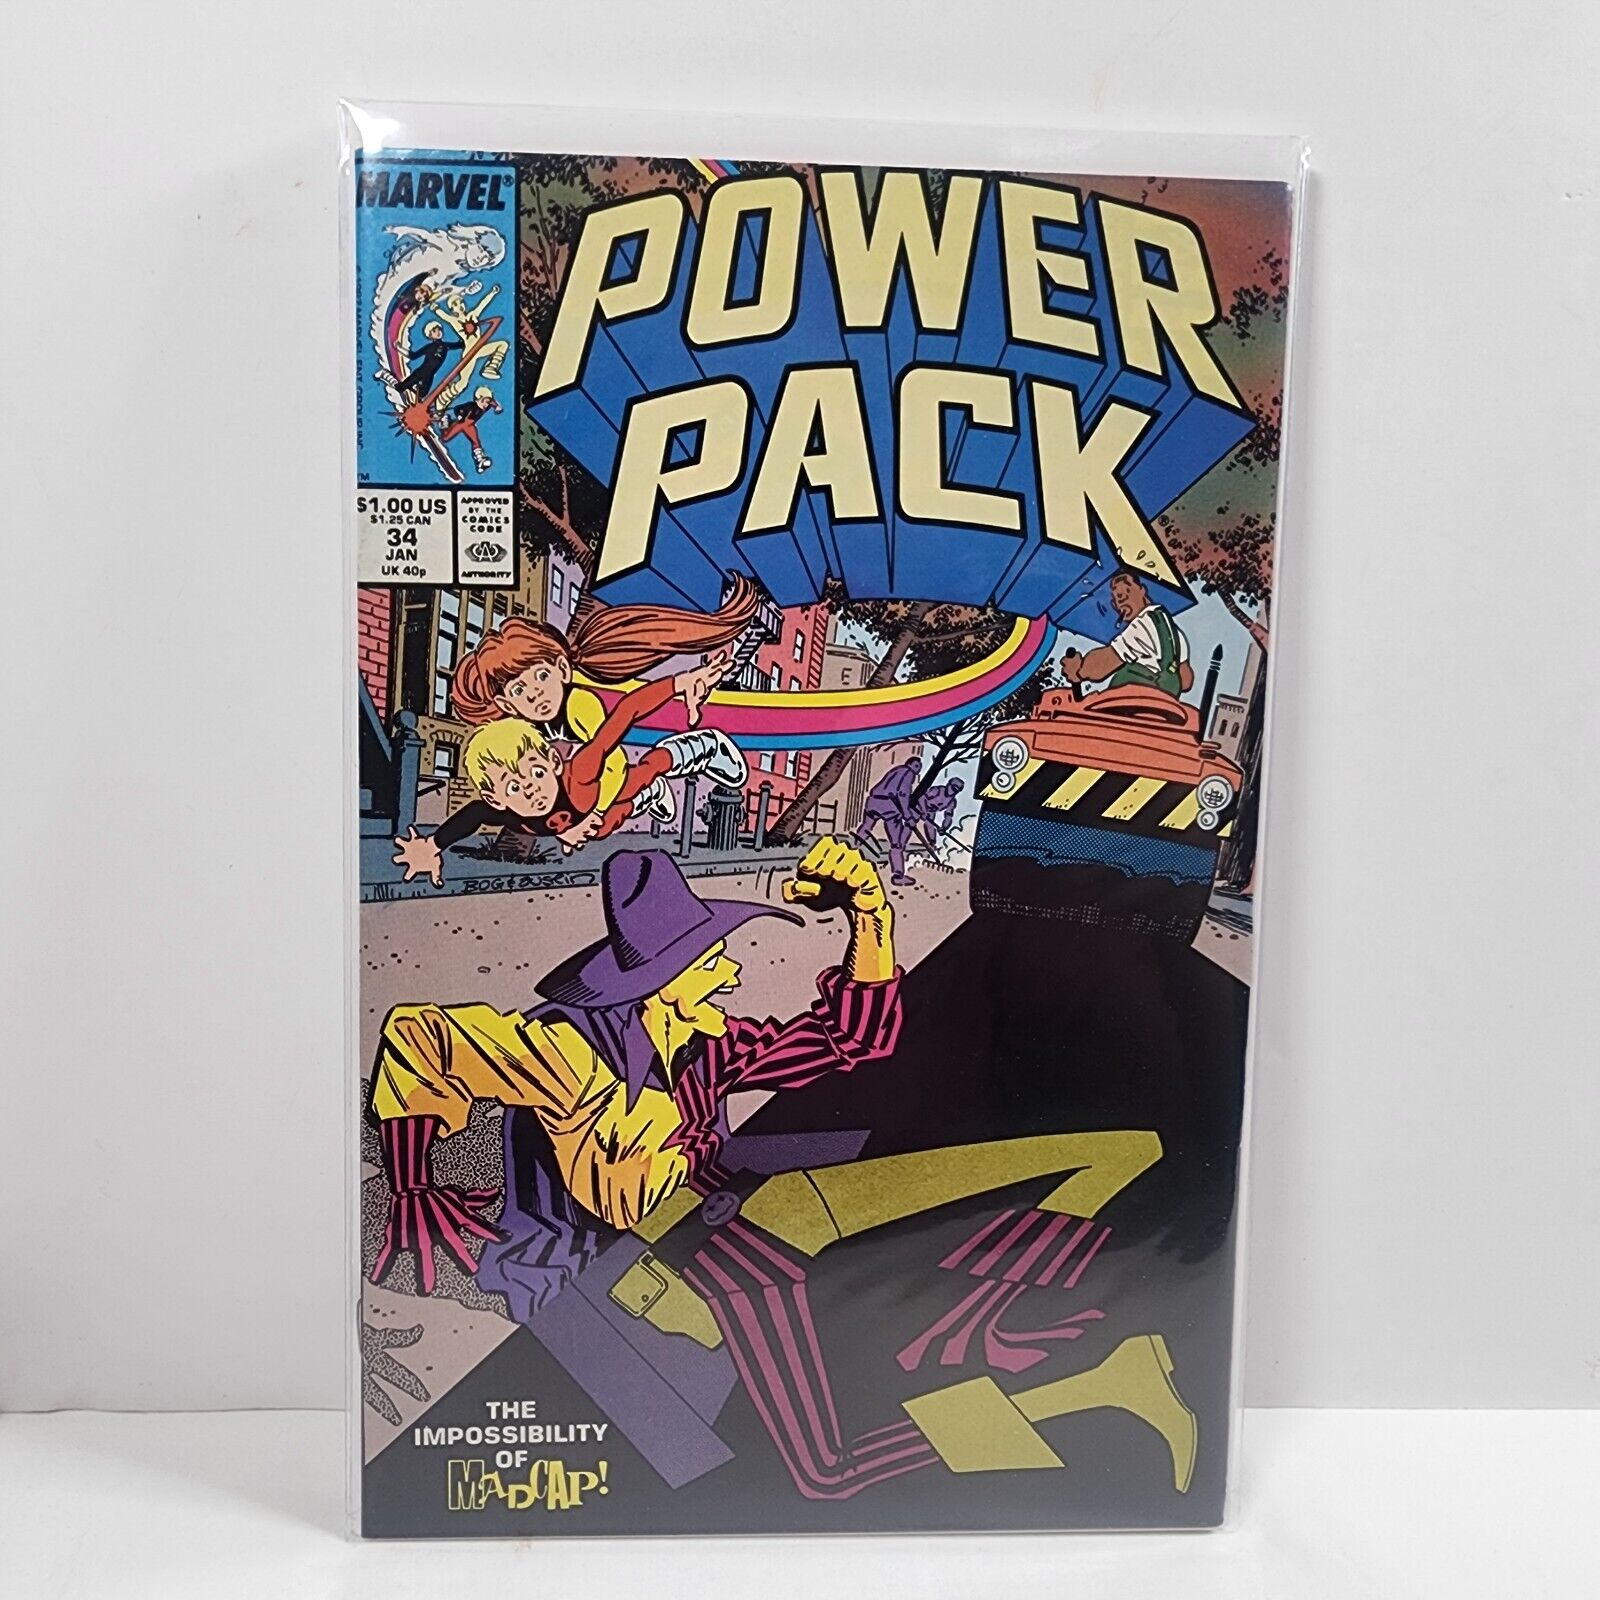 POWER PACK #34 The Impossibility Of MADCAP Marvel Comics 1988